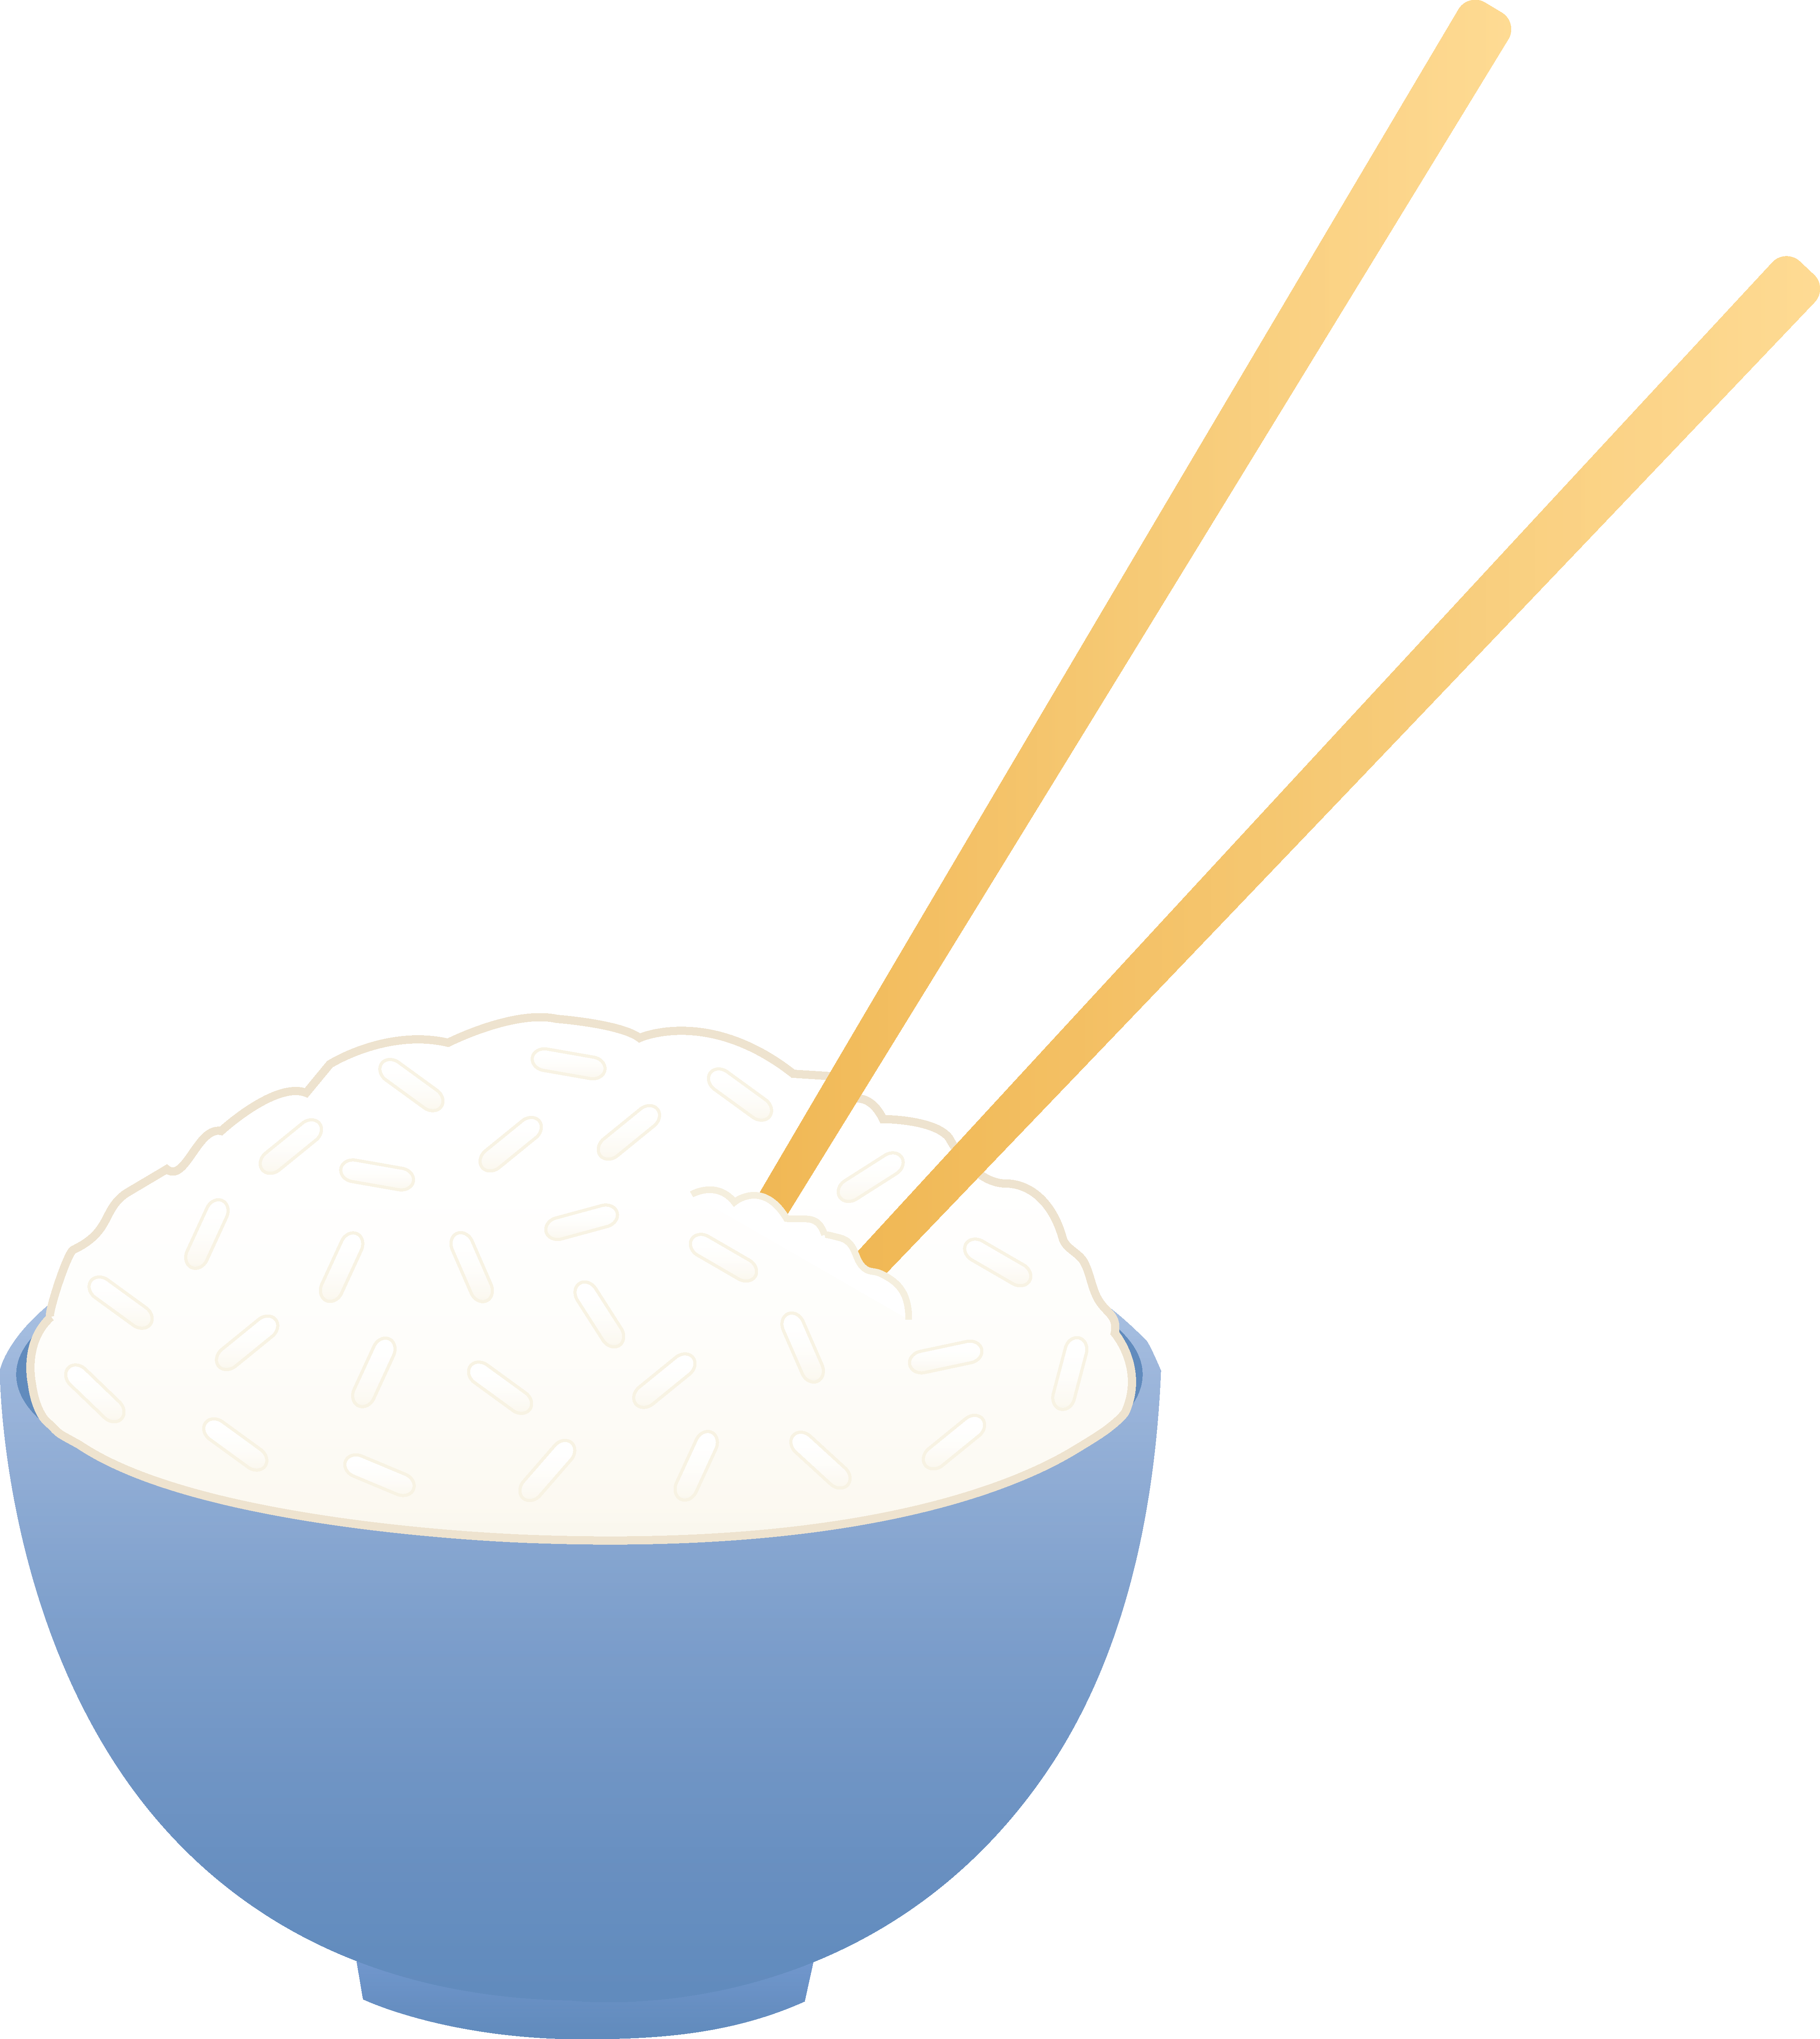 Free Rice Cliparts, Download Free Clip Art, Free Clip Art on.